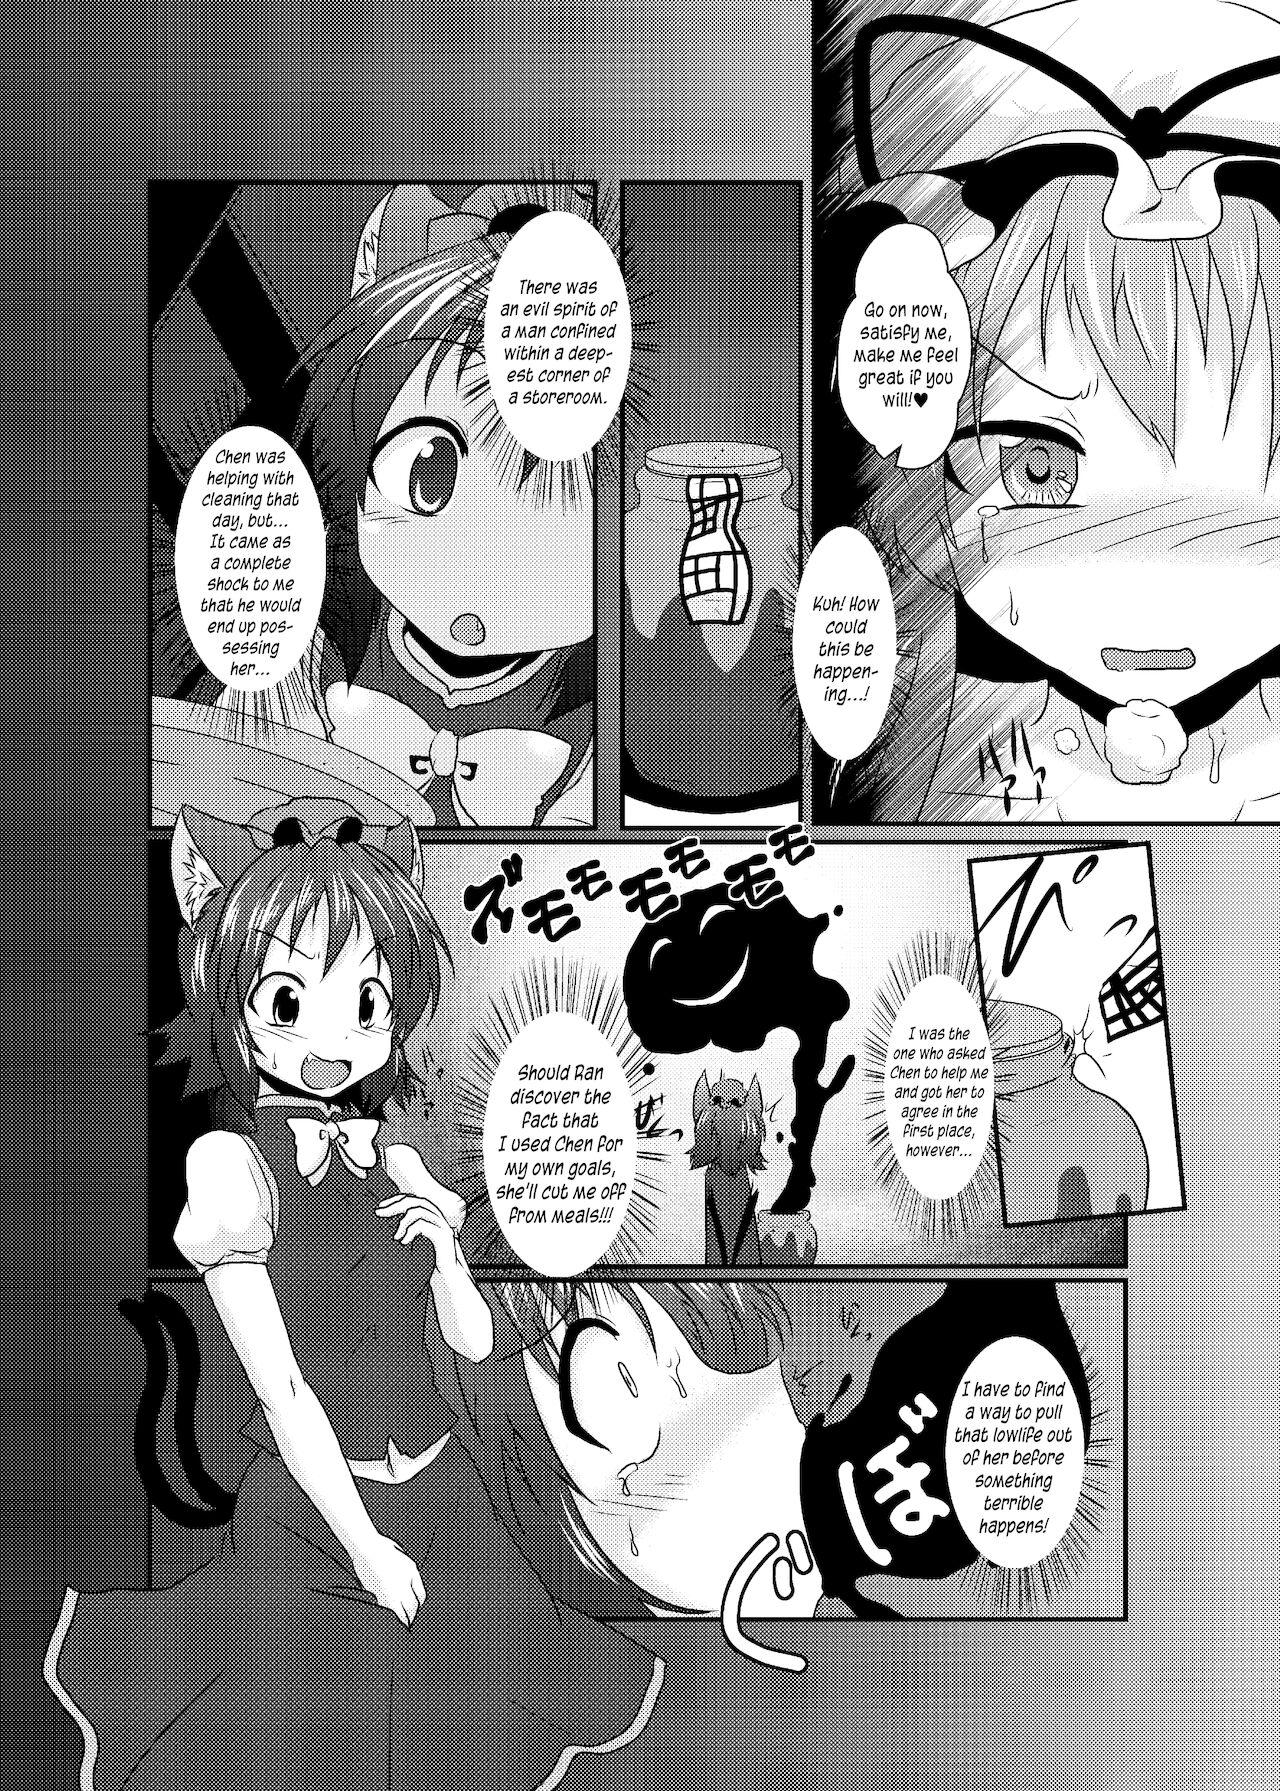 Hooker Chotto Tsukarechatta Mitai | I think I'm a little possessed! - Touhou project Adorable - Page 4